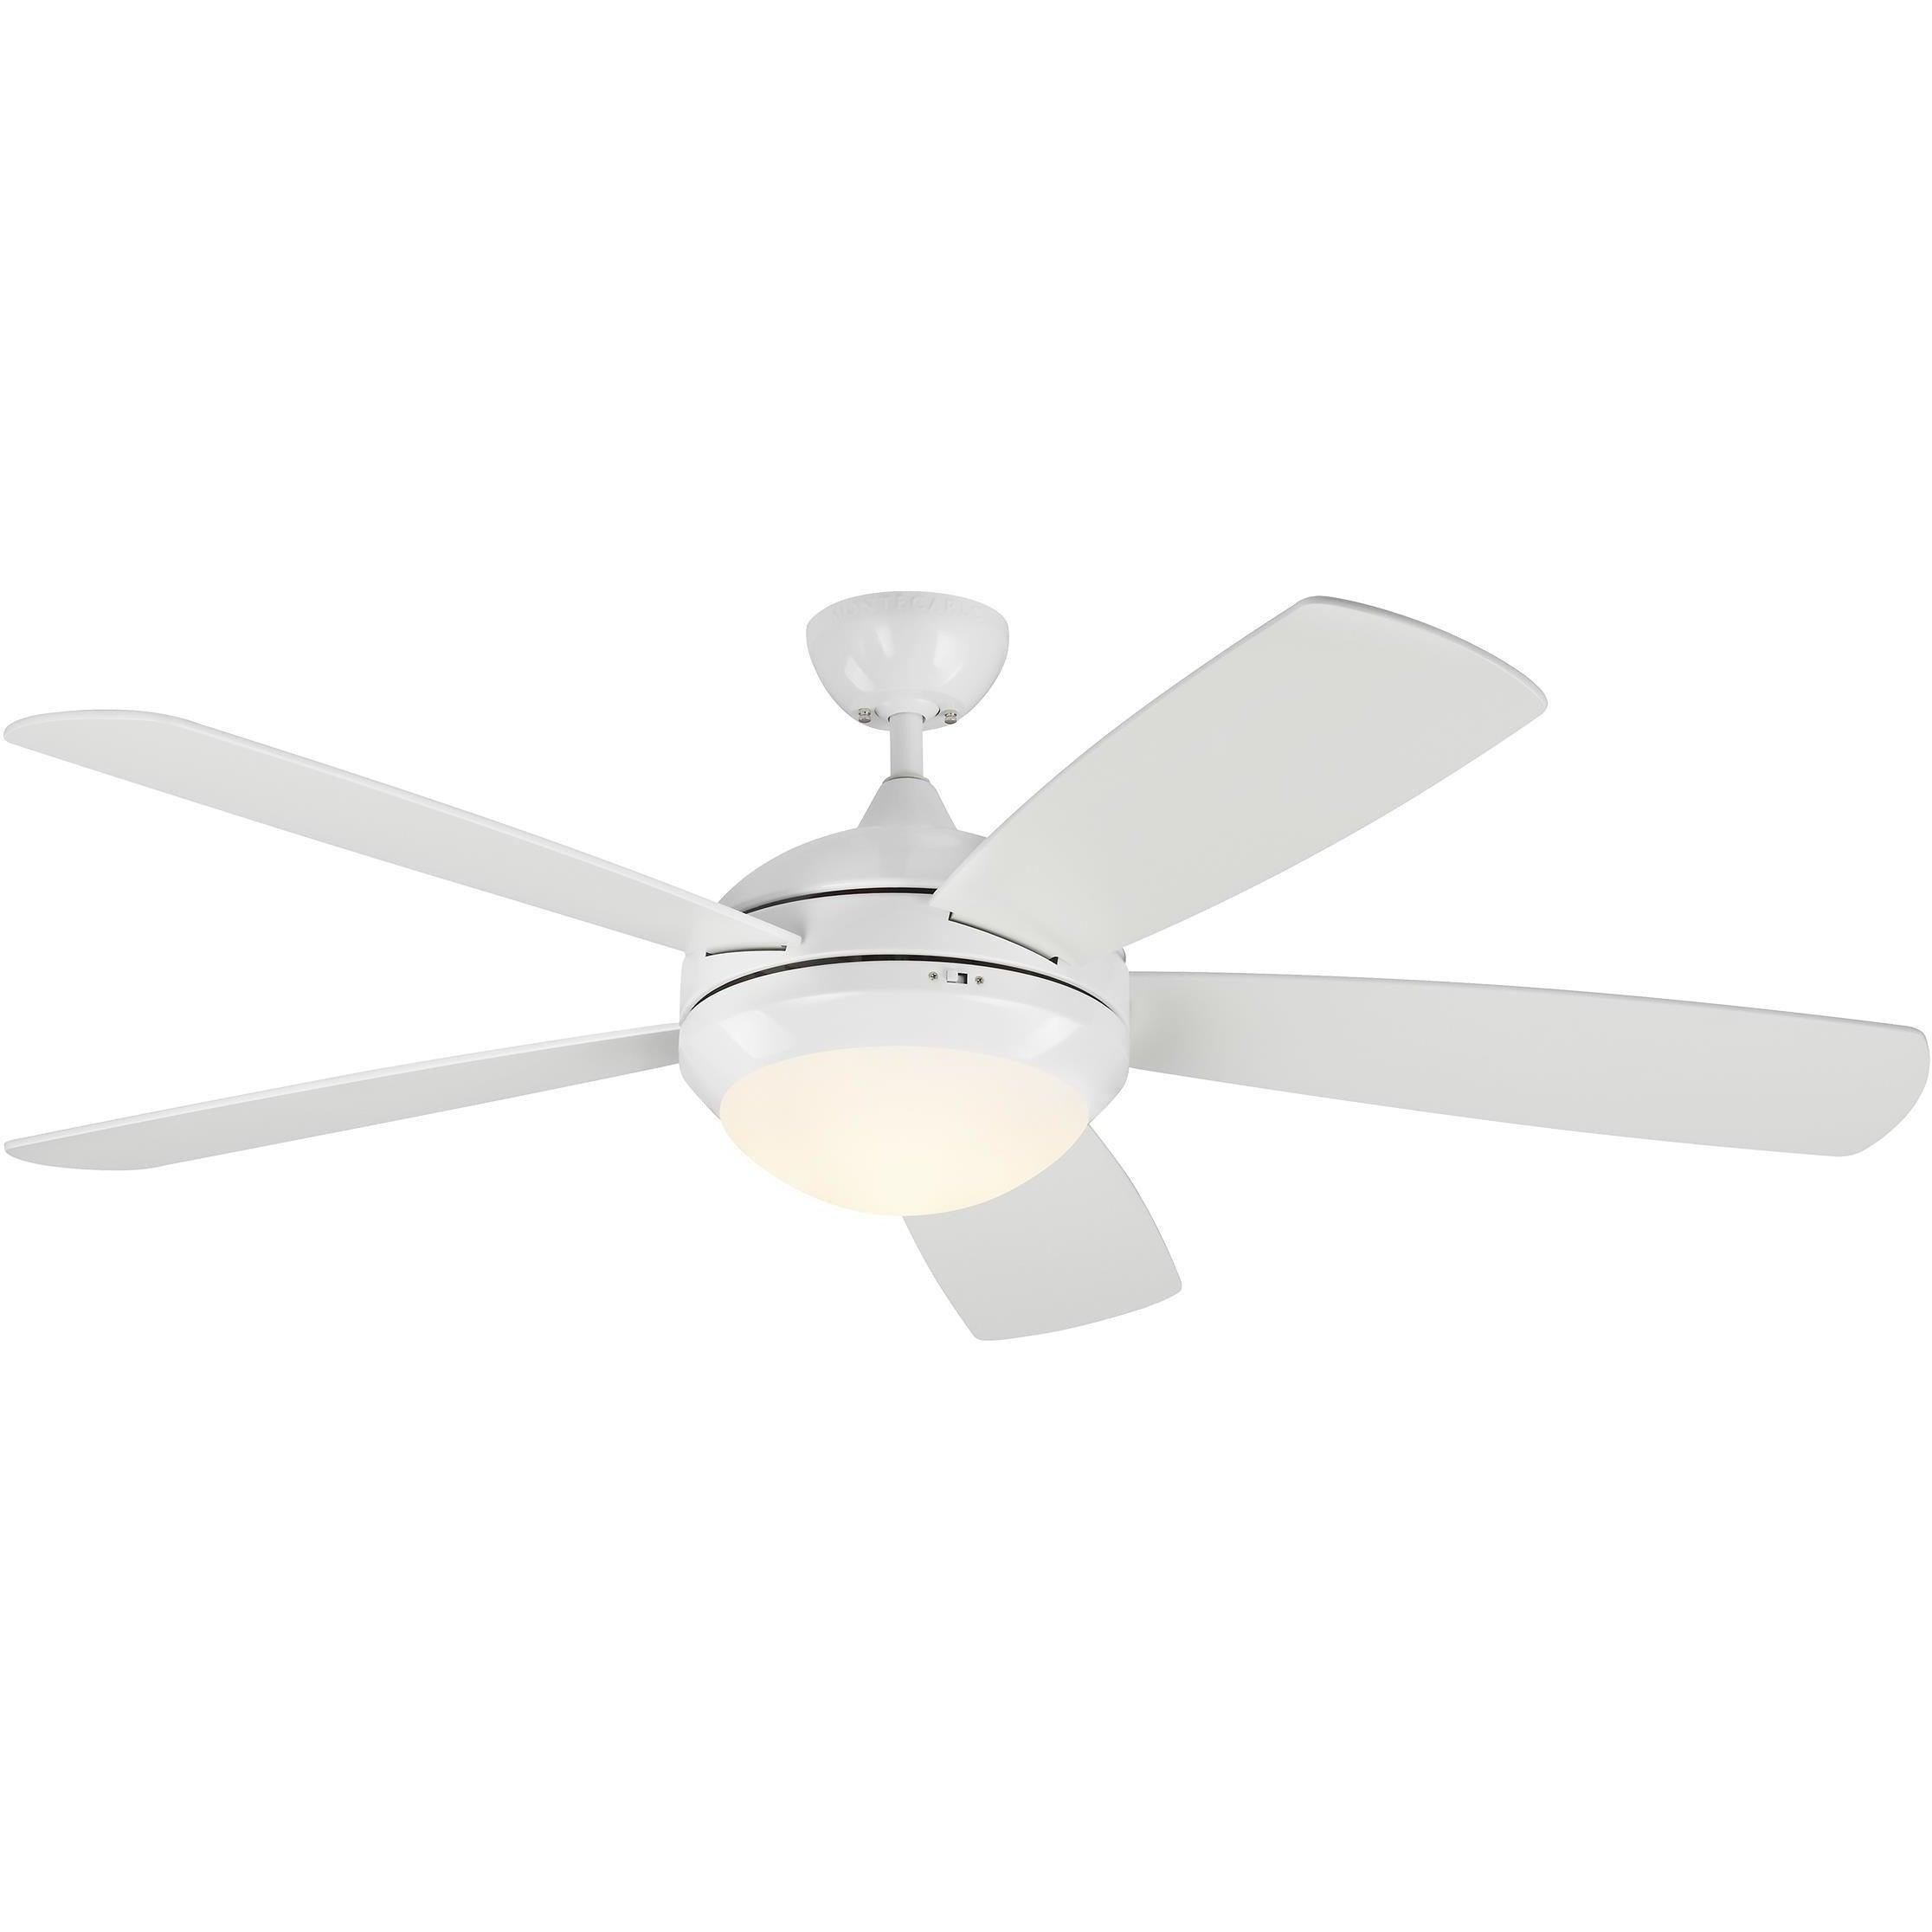 Visual Comfort Fan Collection - Discus Outdoor 52" Ceiling Fan - 5DISM52WHD | Montreal Lighting & Hardware